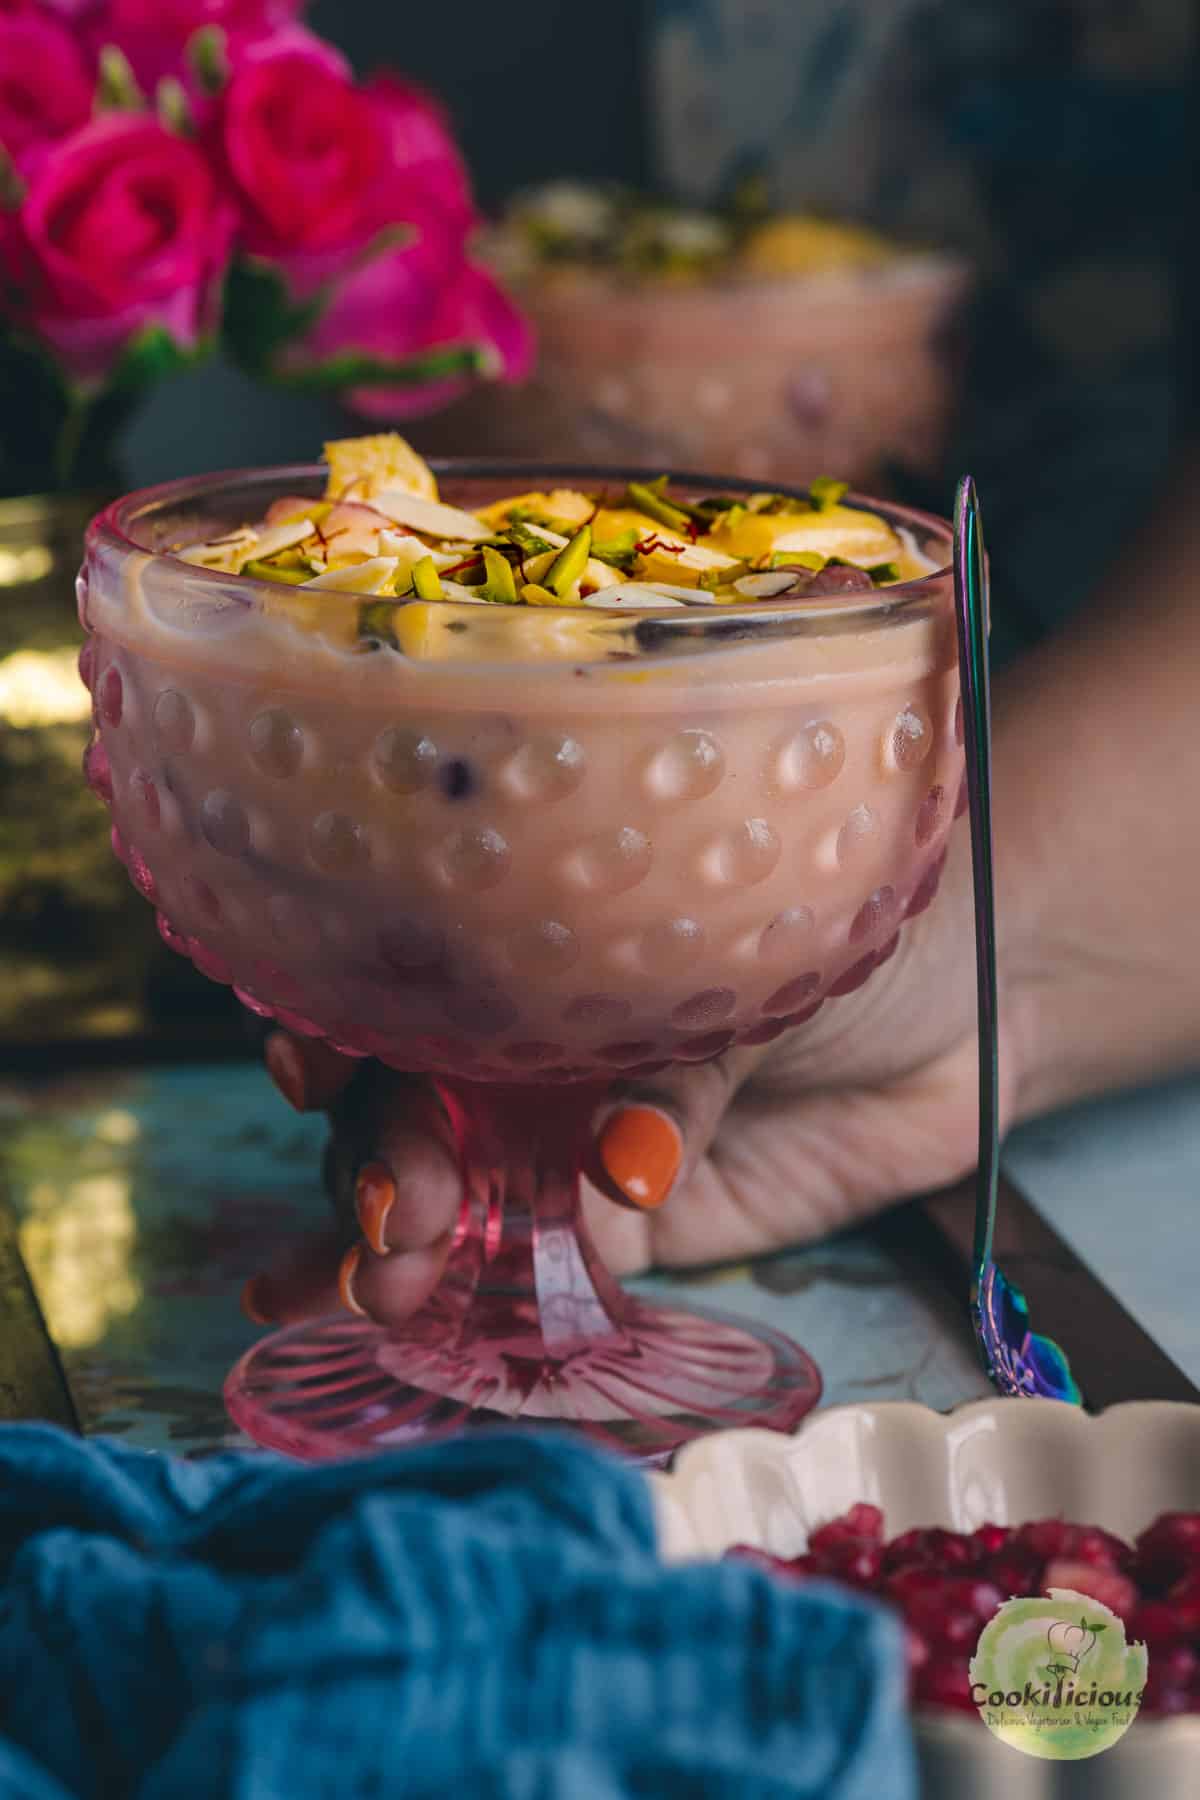 a hand picking up a glass bowl of Indian Fruit Custard